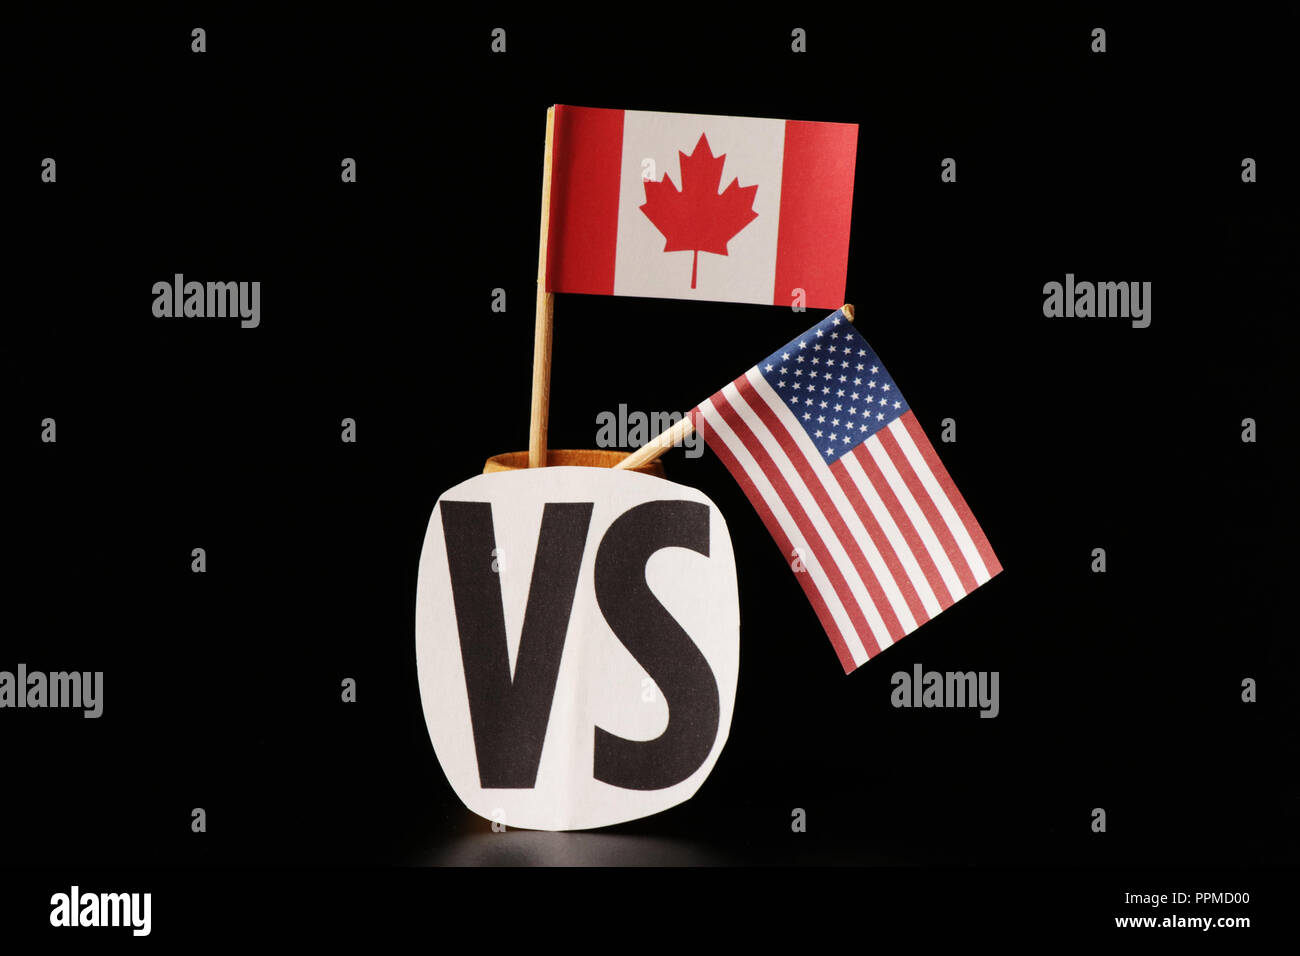 A national flag of Canada and flag of united states. Both lands have different opinions but same language. Black background Stock Photo